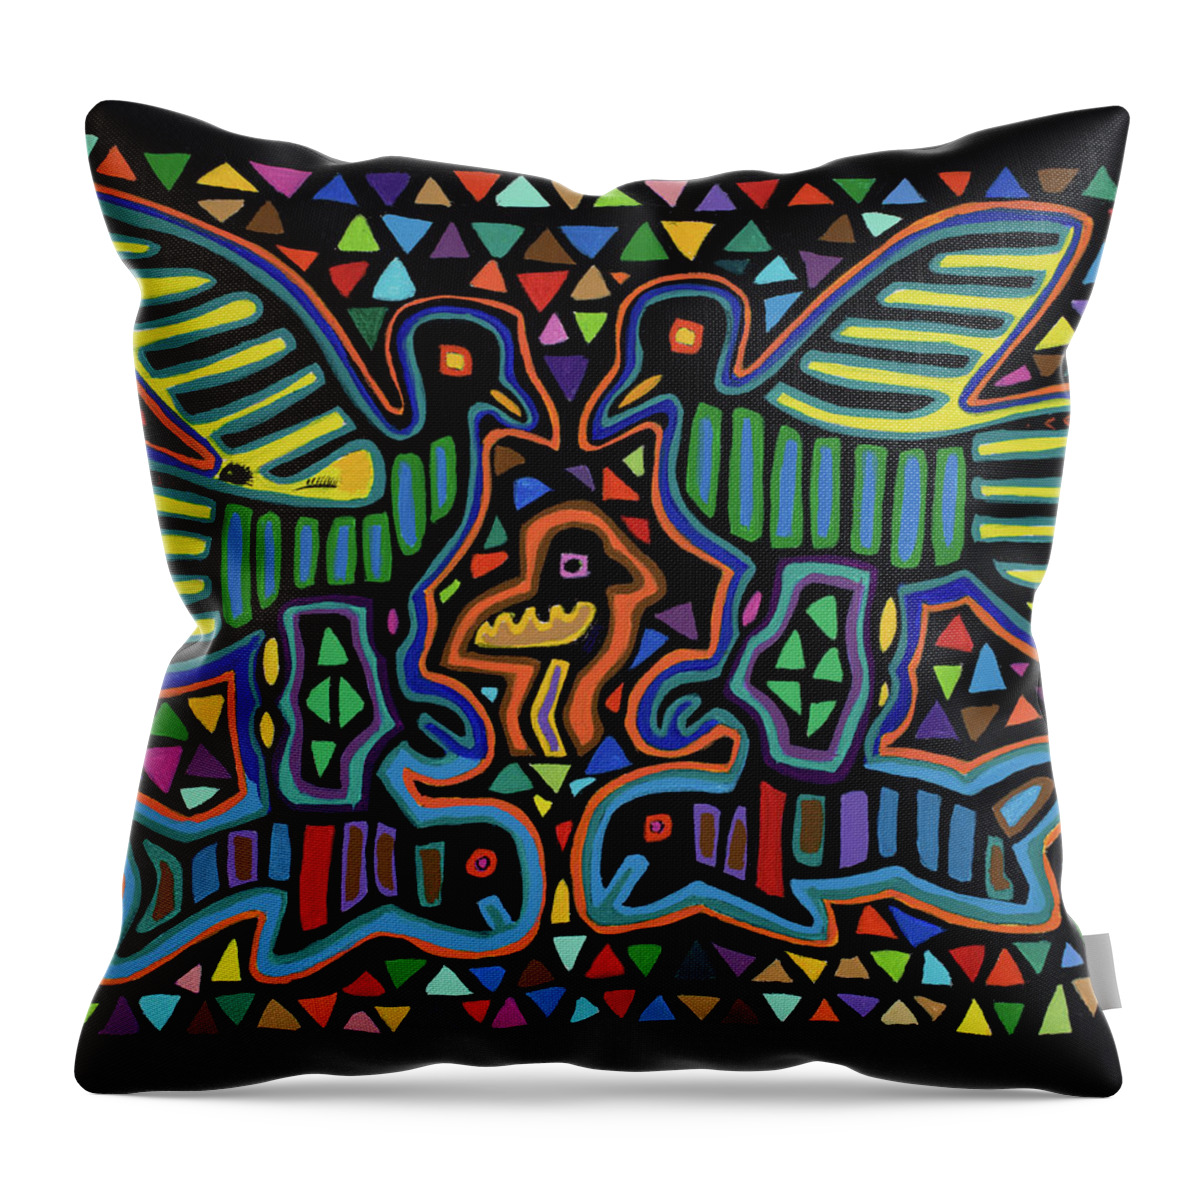 San Blas Designs Trapunto Quilts Acrylic Painting Ancient Designs Mole Primitive Painting Primitive Design Black Green Blue Yellow Throw Pillow featuring the painting San Blas III by Pat Saunders-White